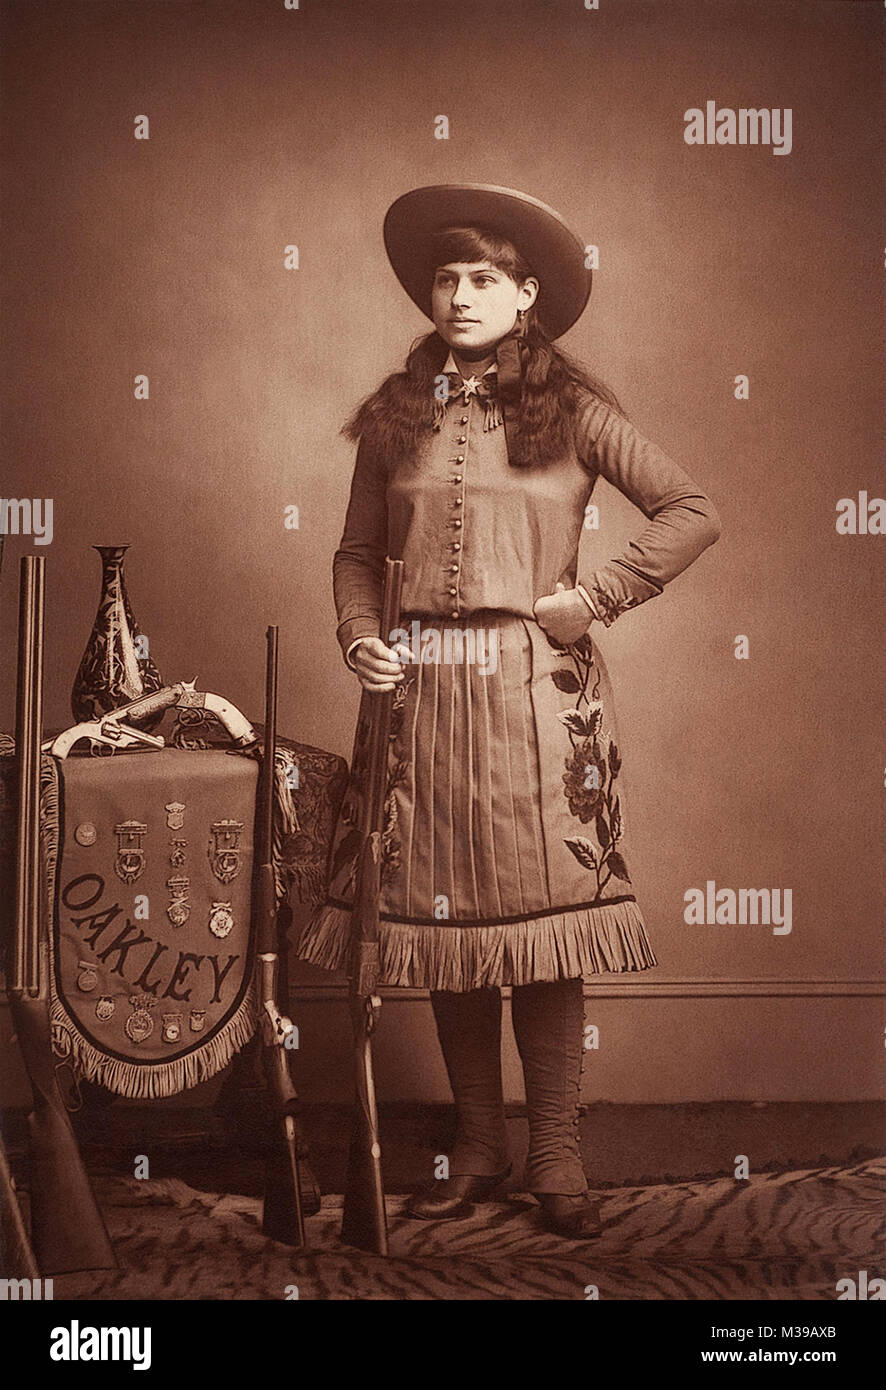 Annie Oakley (1860-1926) was an outstanding American sharpshooter who  became famous while performing in Buffalo Bill's Wild West Show. Photo  c1887-1880s by Elliott & Fry, London, England Stock Photo - Alamy